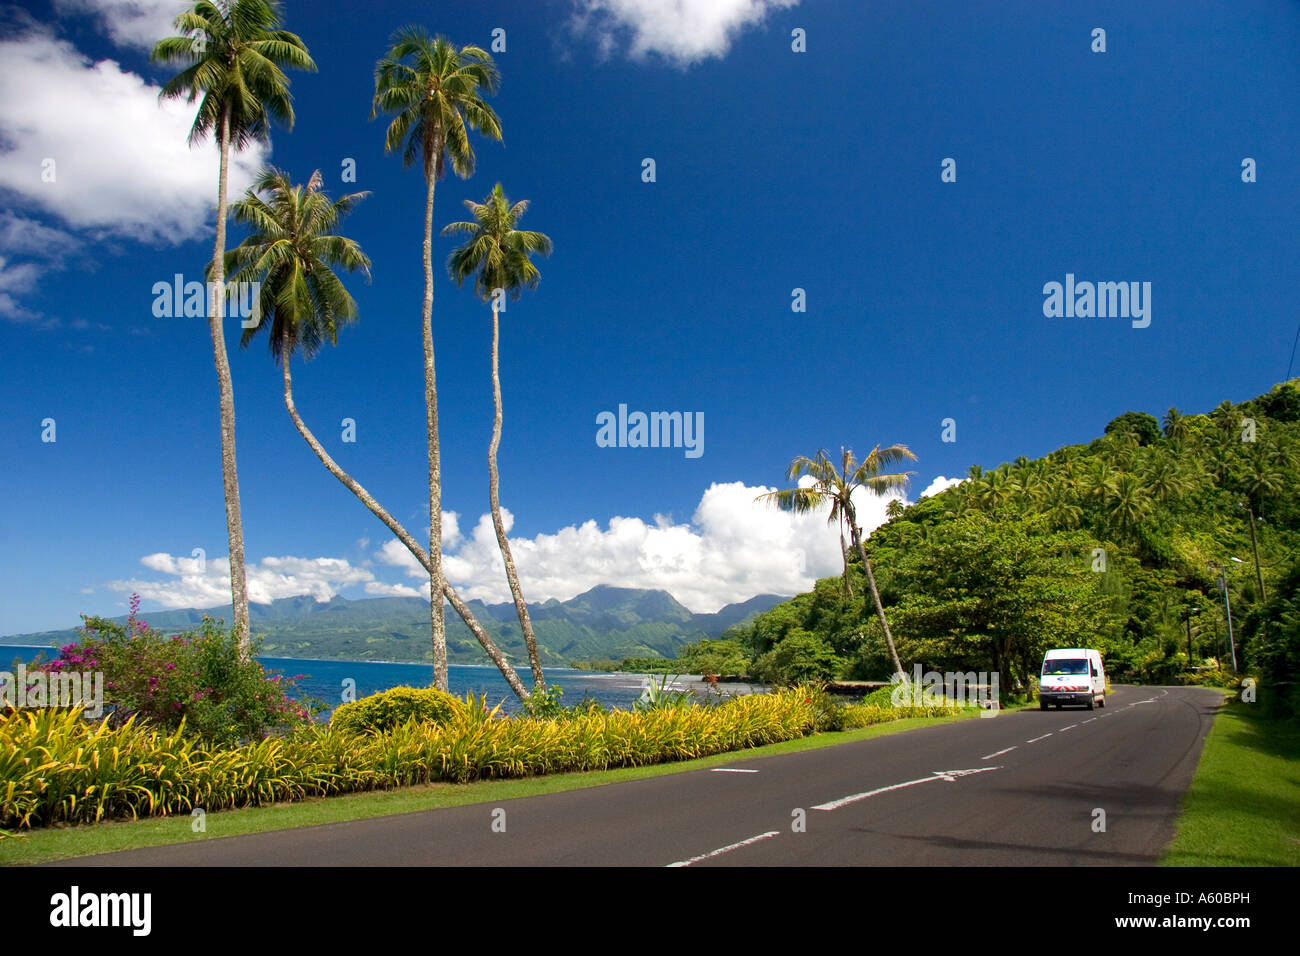 Road and scenic view of the seascape on the island of Tahiti Stock Photo